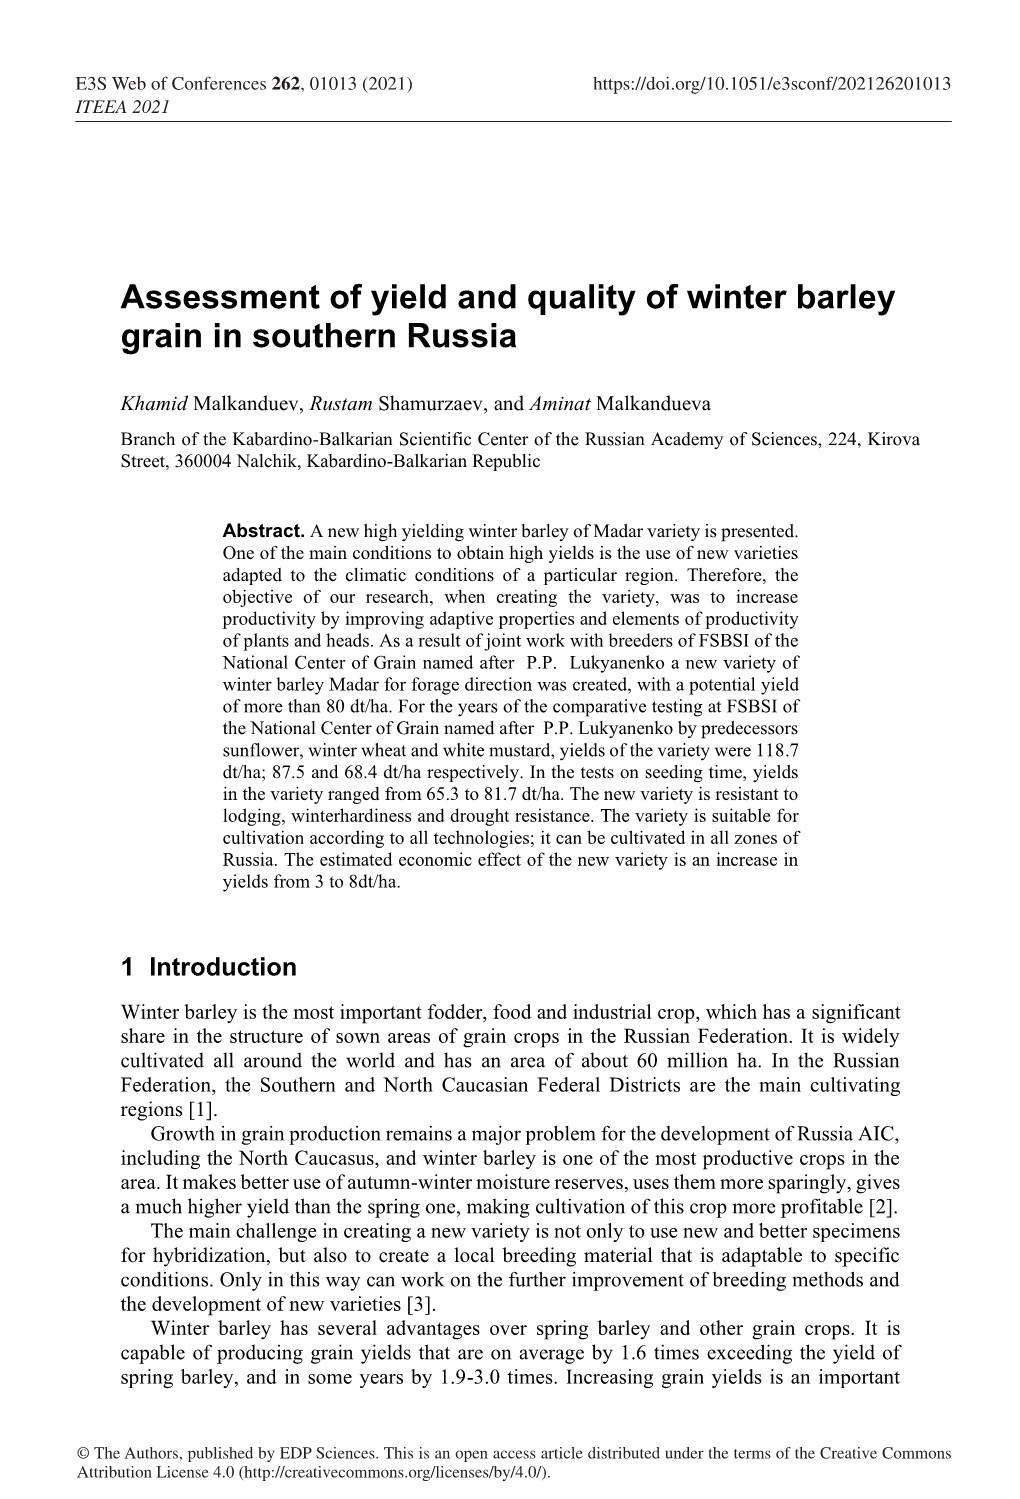 Assessment of Yield and Quality of Winter Barley Grain in Southern Russia